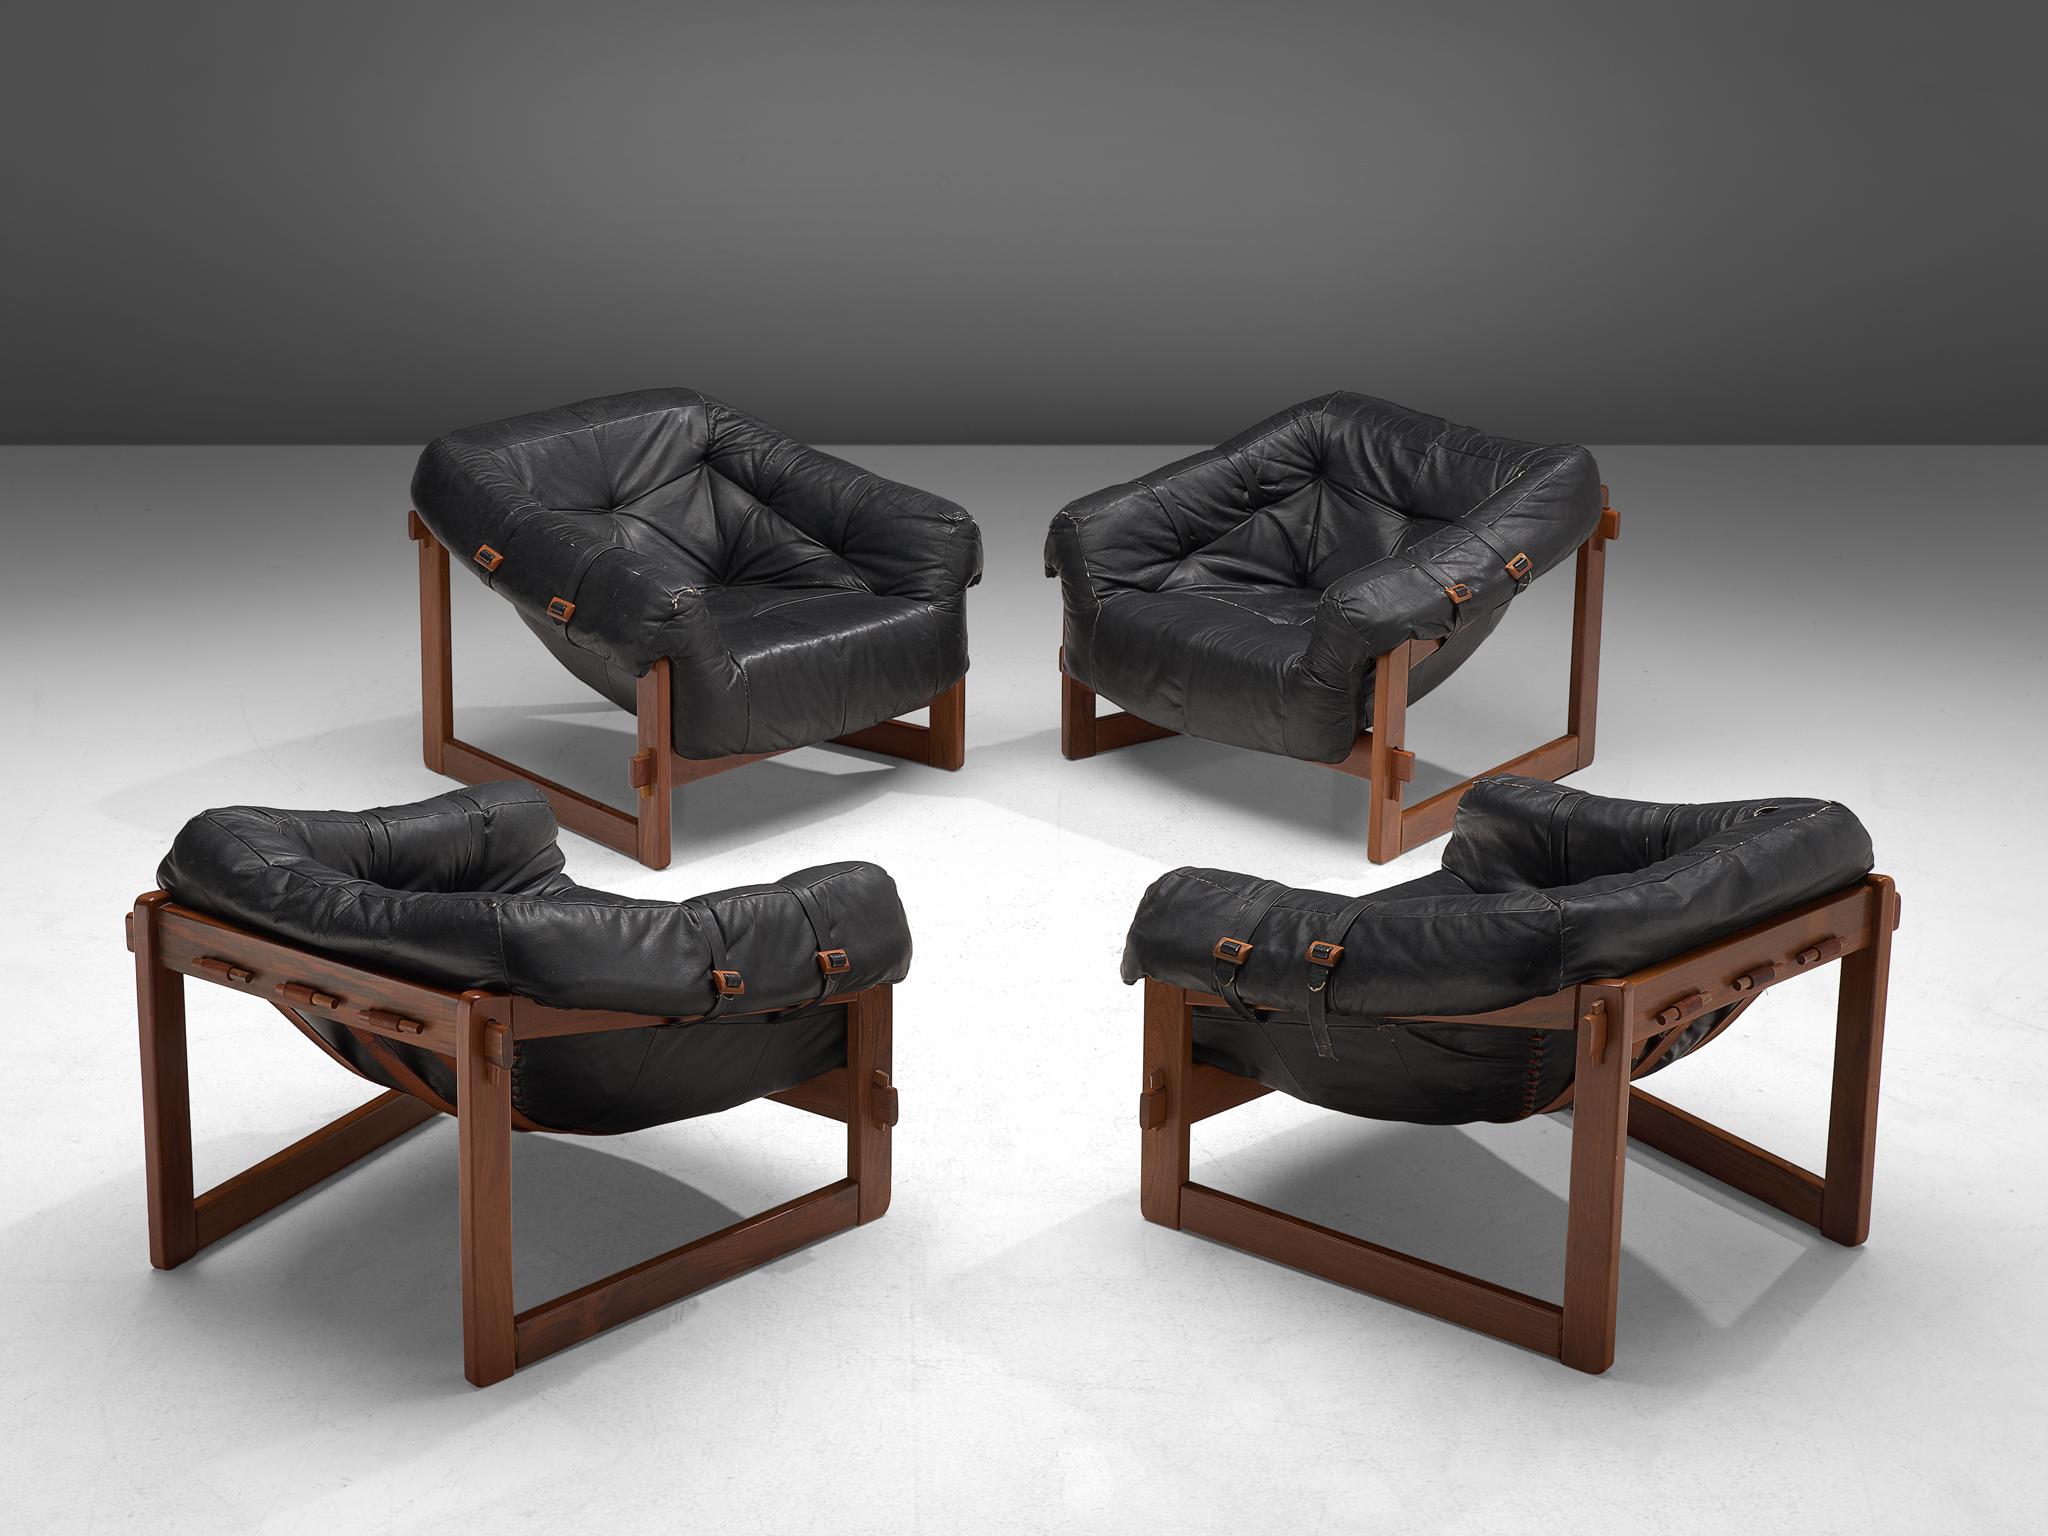 Percival Lafer, set of four lounge chairs, leather and Brazilian hardwood, Brazil, late 1960s.

Bulky and grand lounge chairs by Brazilian designer Percival Lafer. This set features a solid dark wooden base with brown leather straps spanned